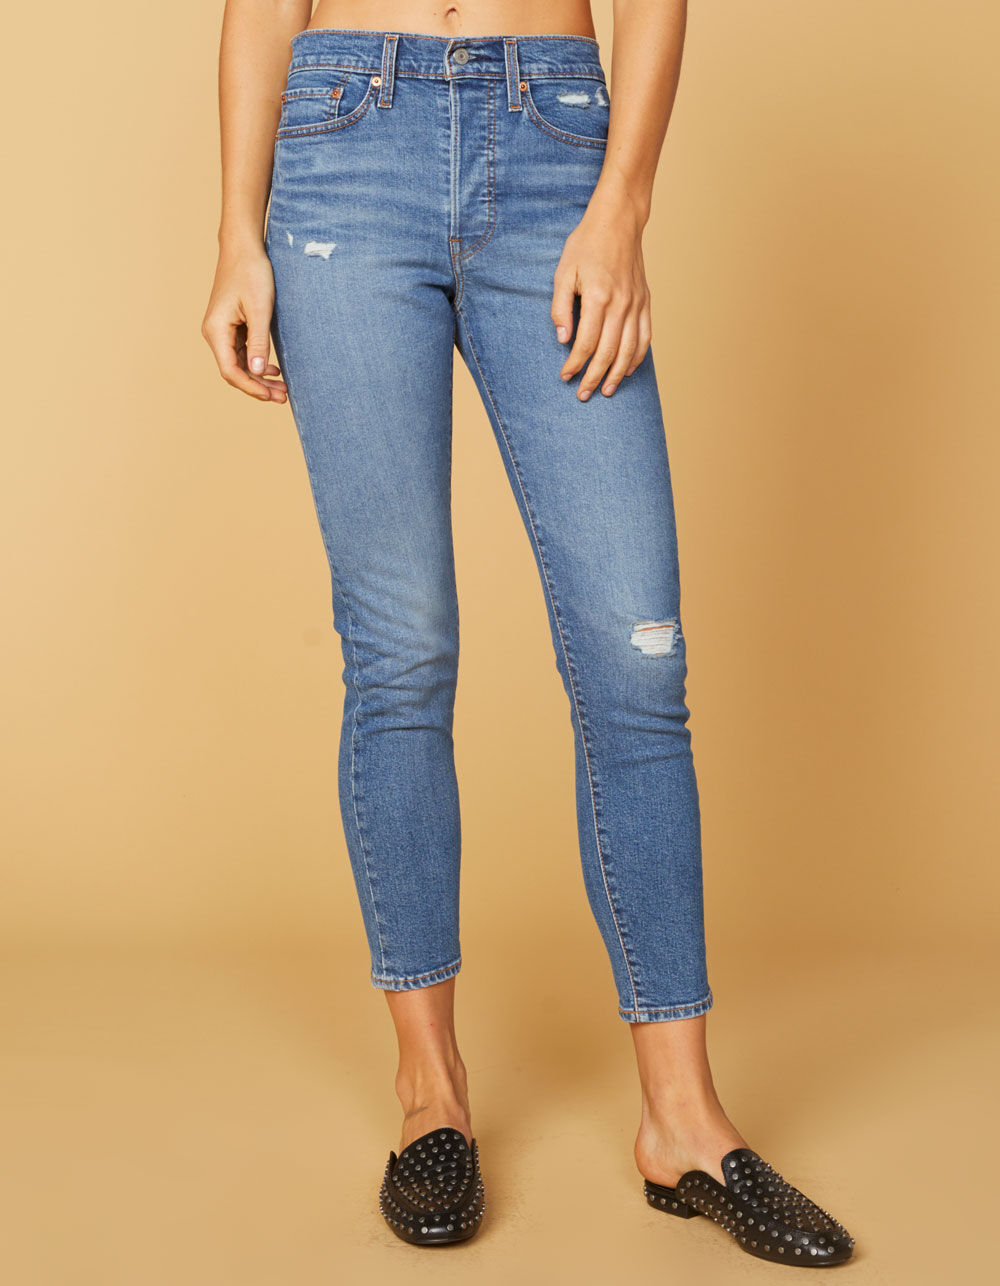 LEVI'S Wedgie High Rise Womens Skinny Ripped Jeans - MEDIUM WASH | Tillys